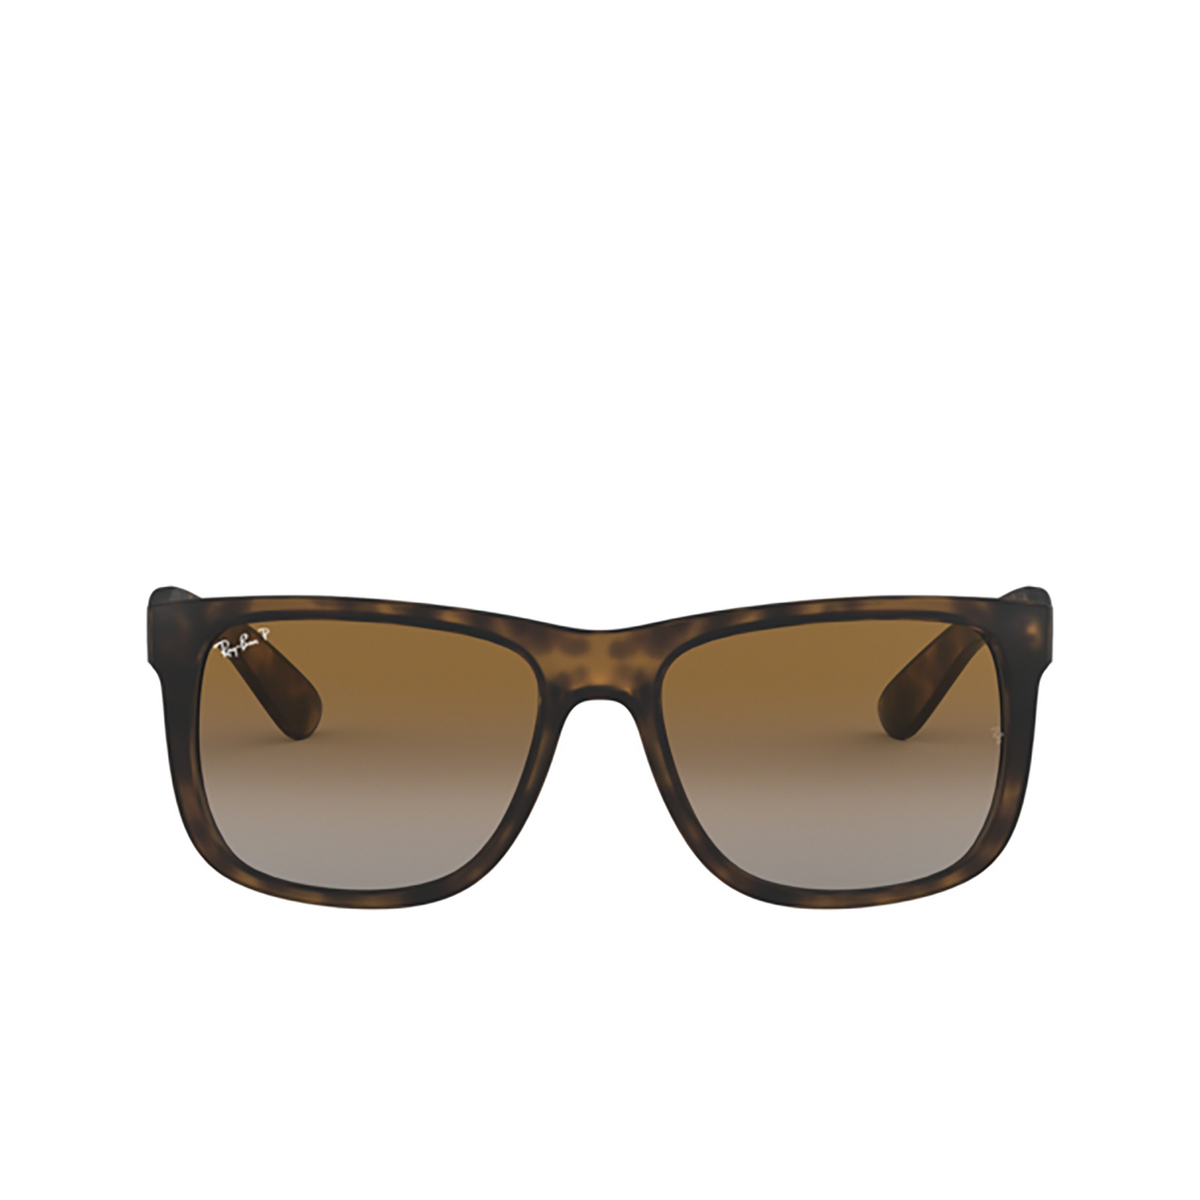 Ray-Ban JUSTIN Sunglasses 865/T5 RUBBER HAVANA - front view